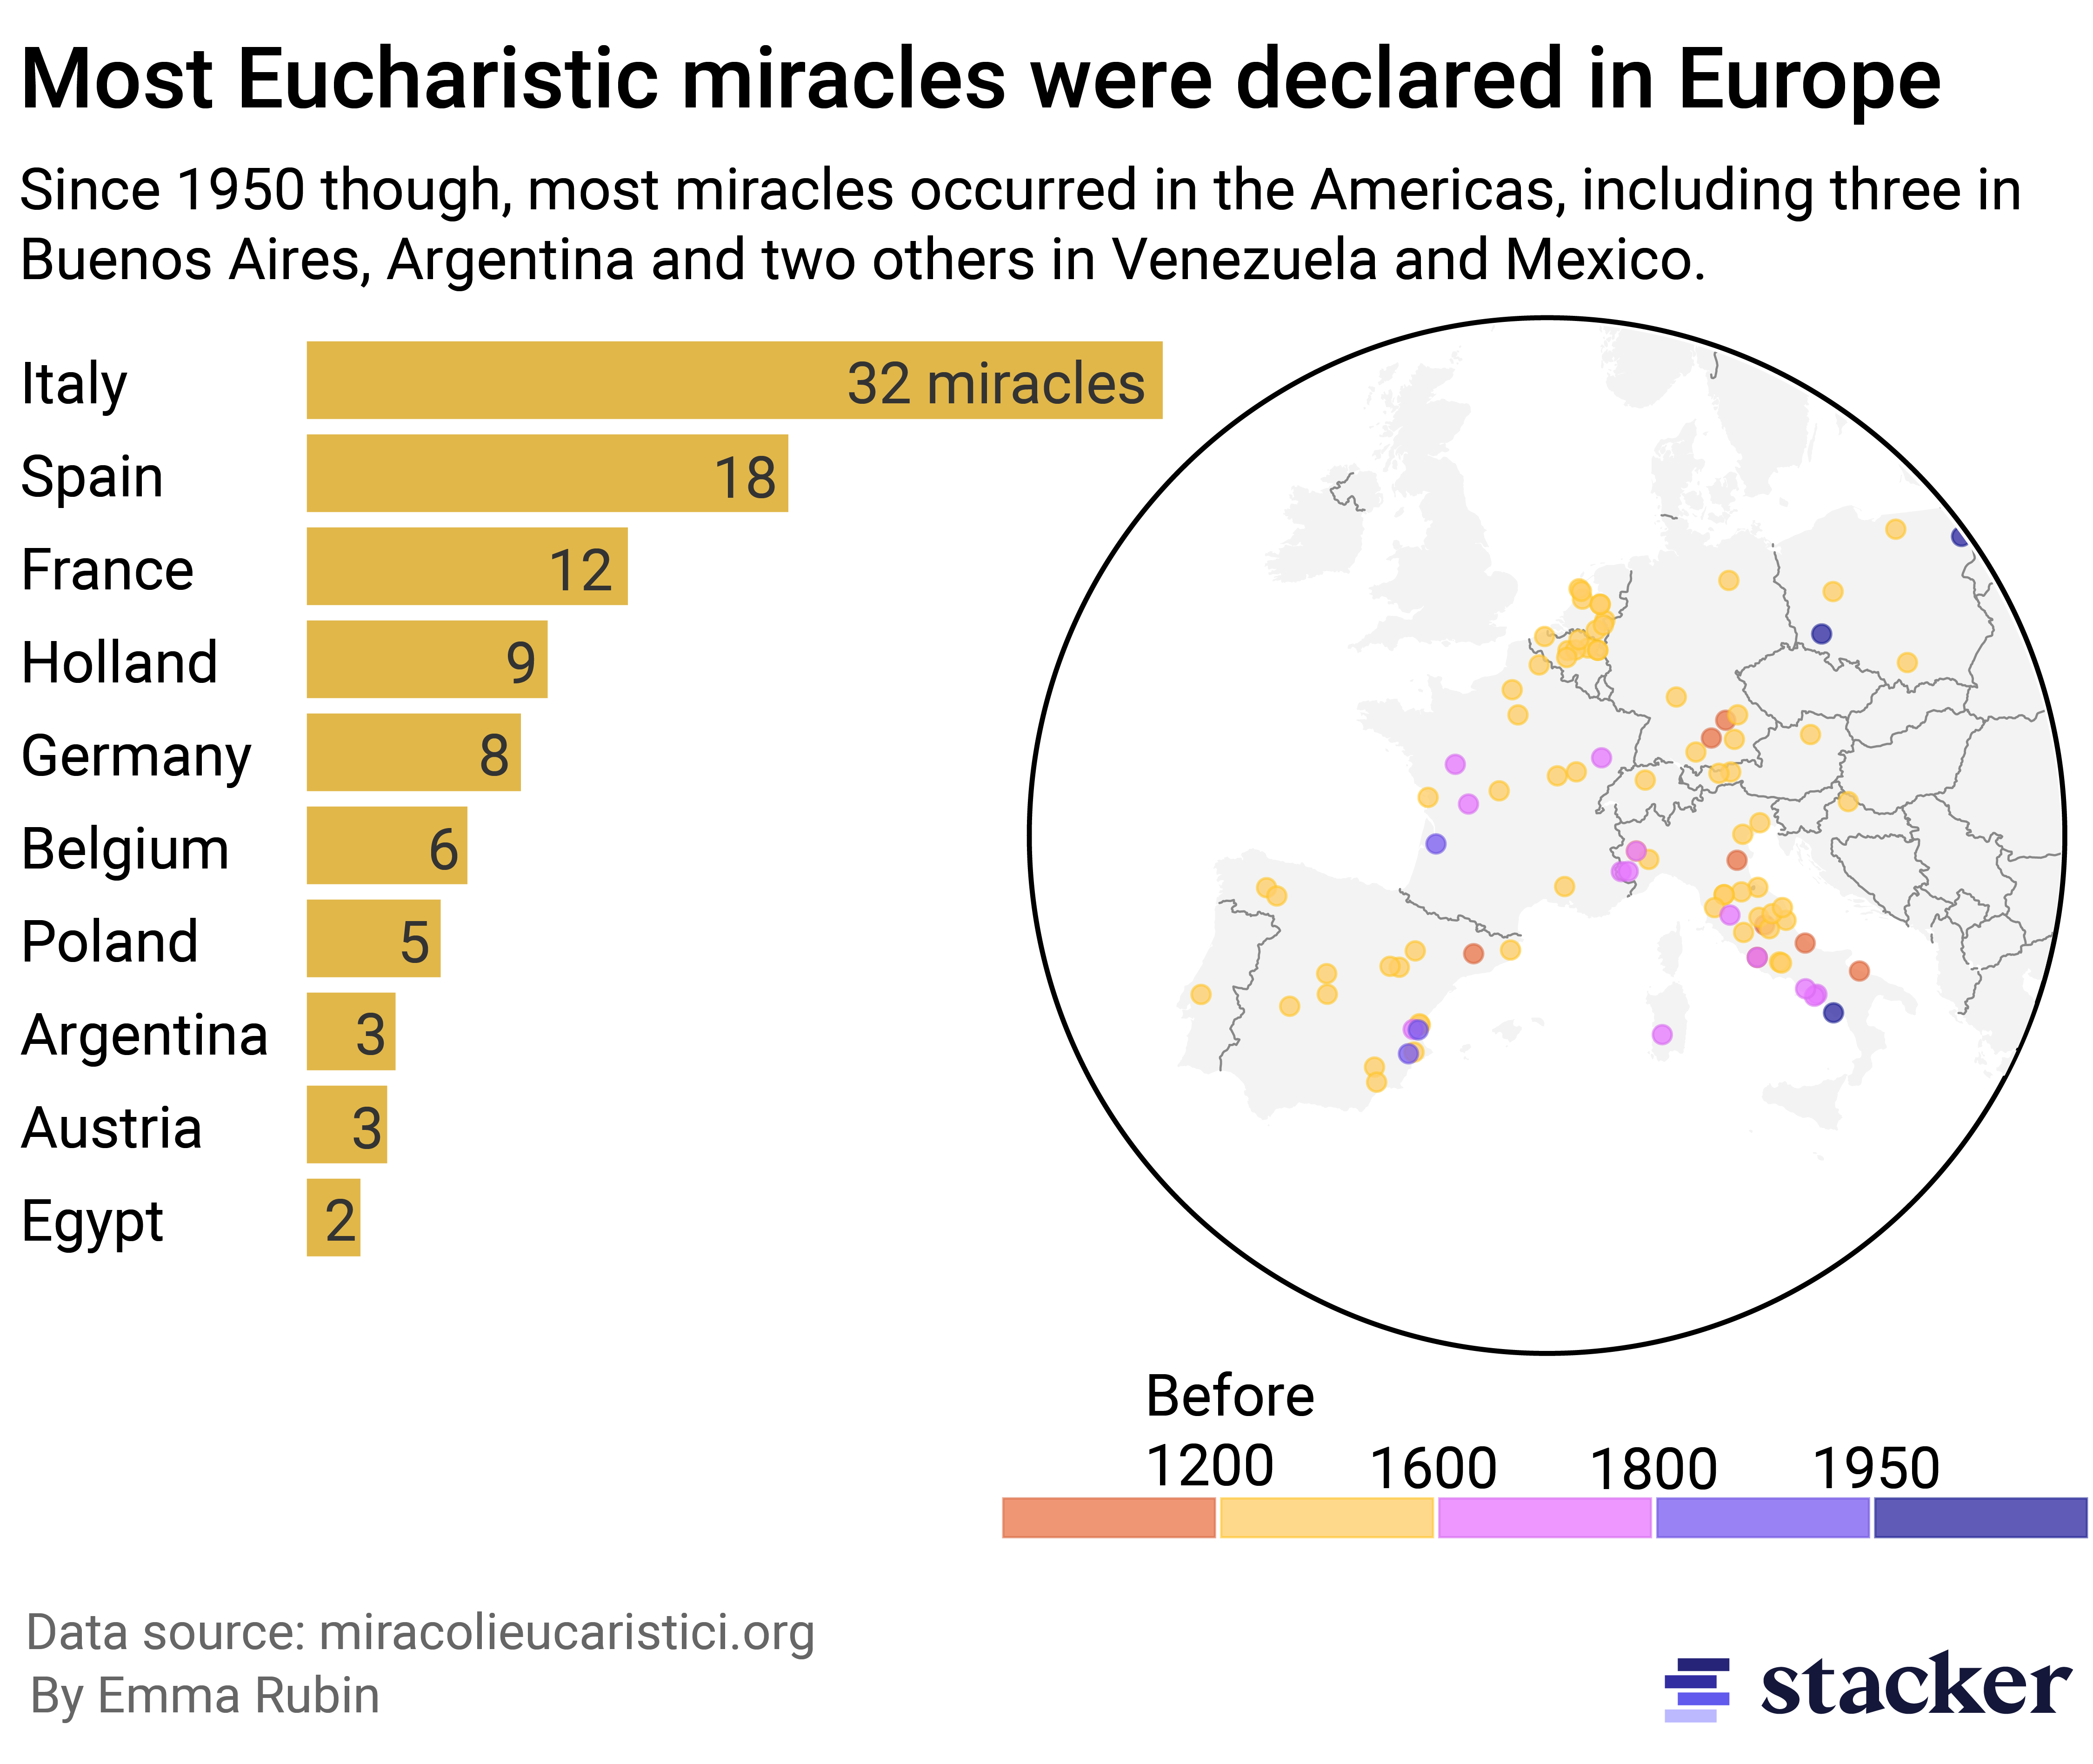 Bar chart and map showing Europe leads miracle counts, largely due a surge between the 13th and 17th century.